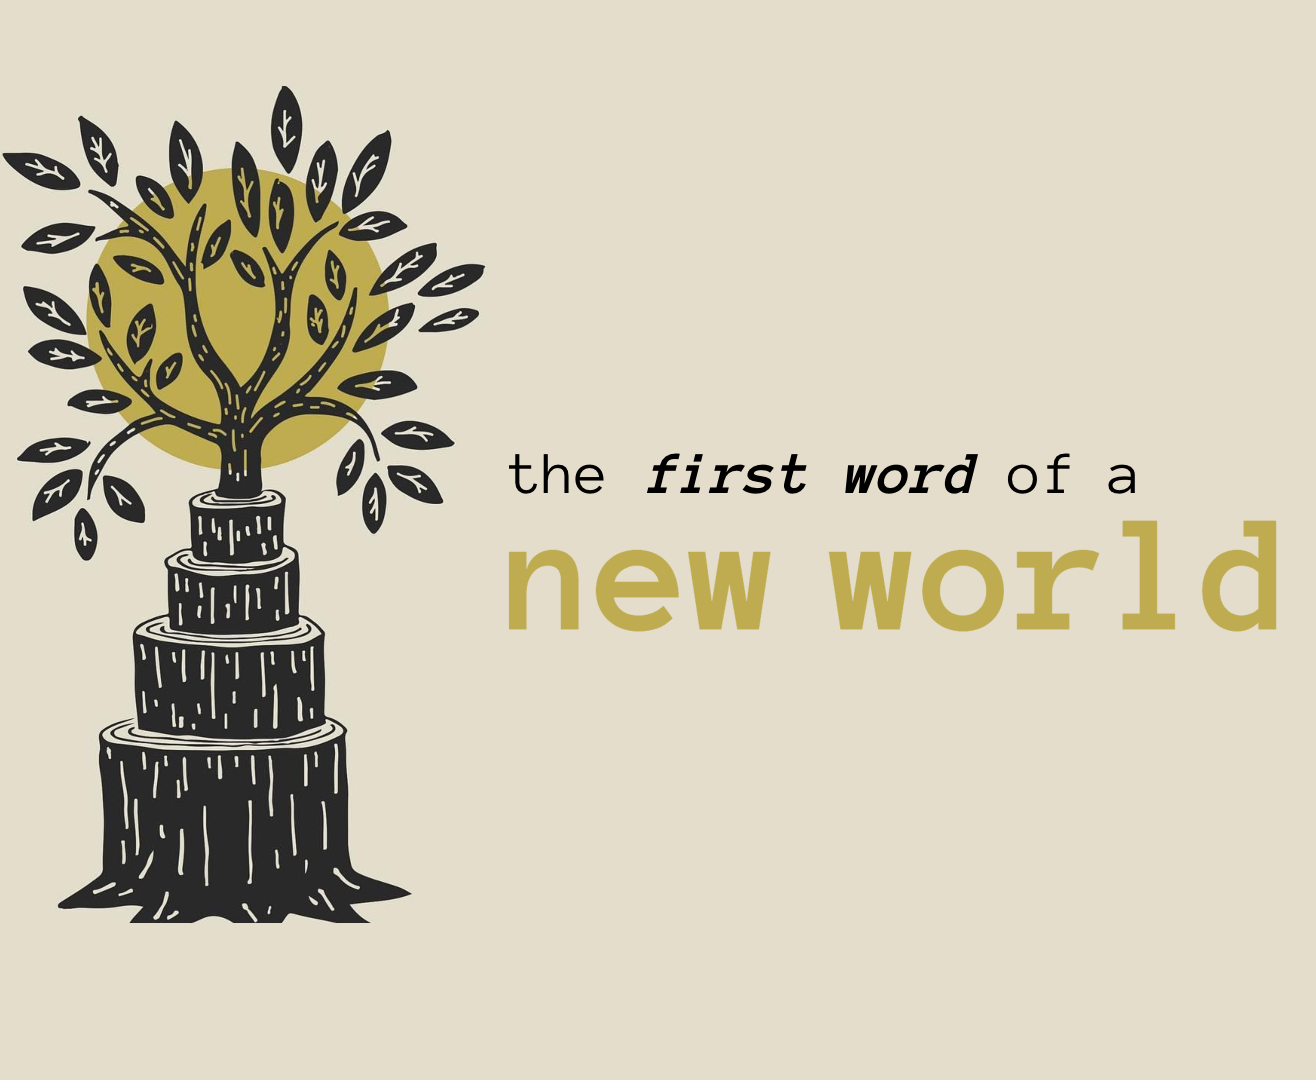 Ryan Post - "The First Word of a New World"